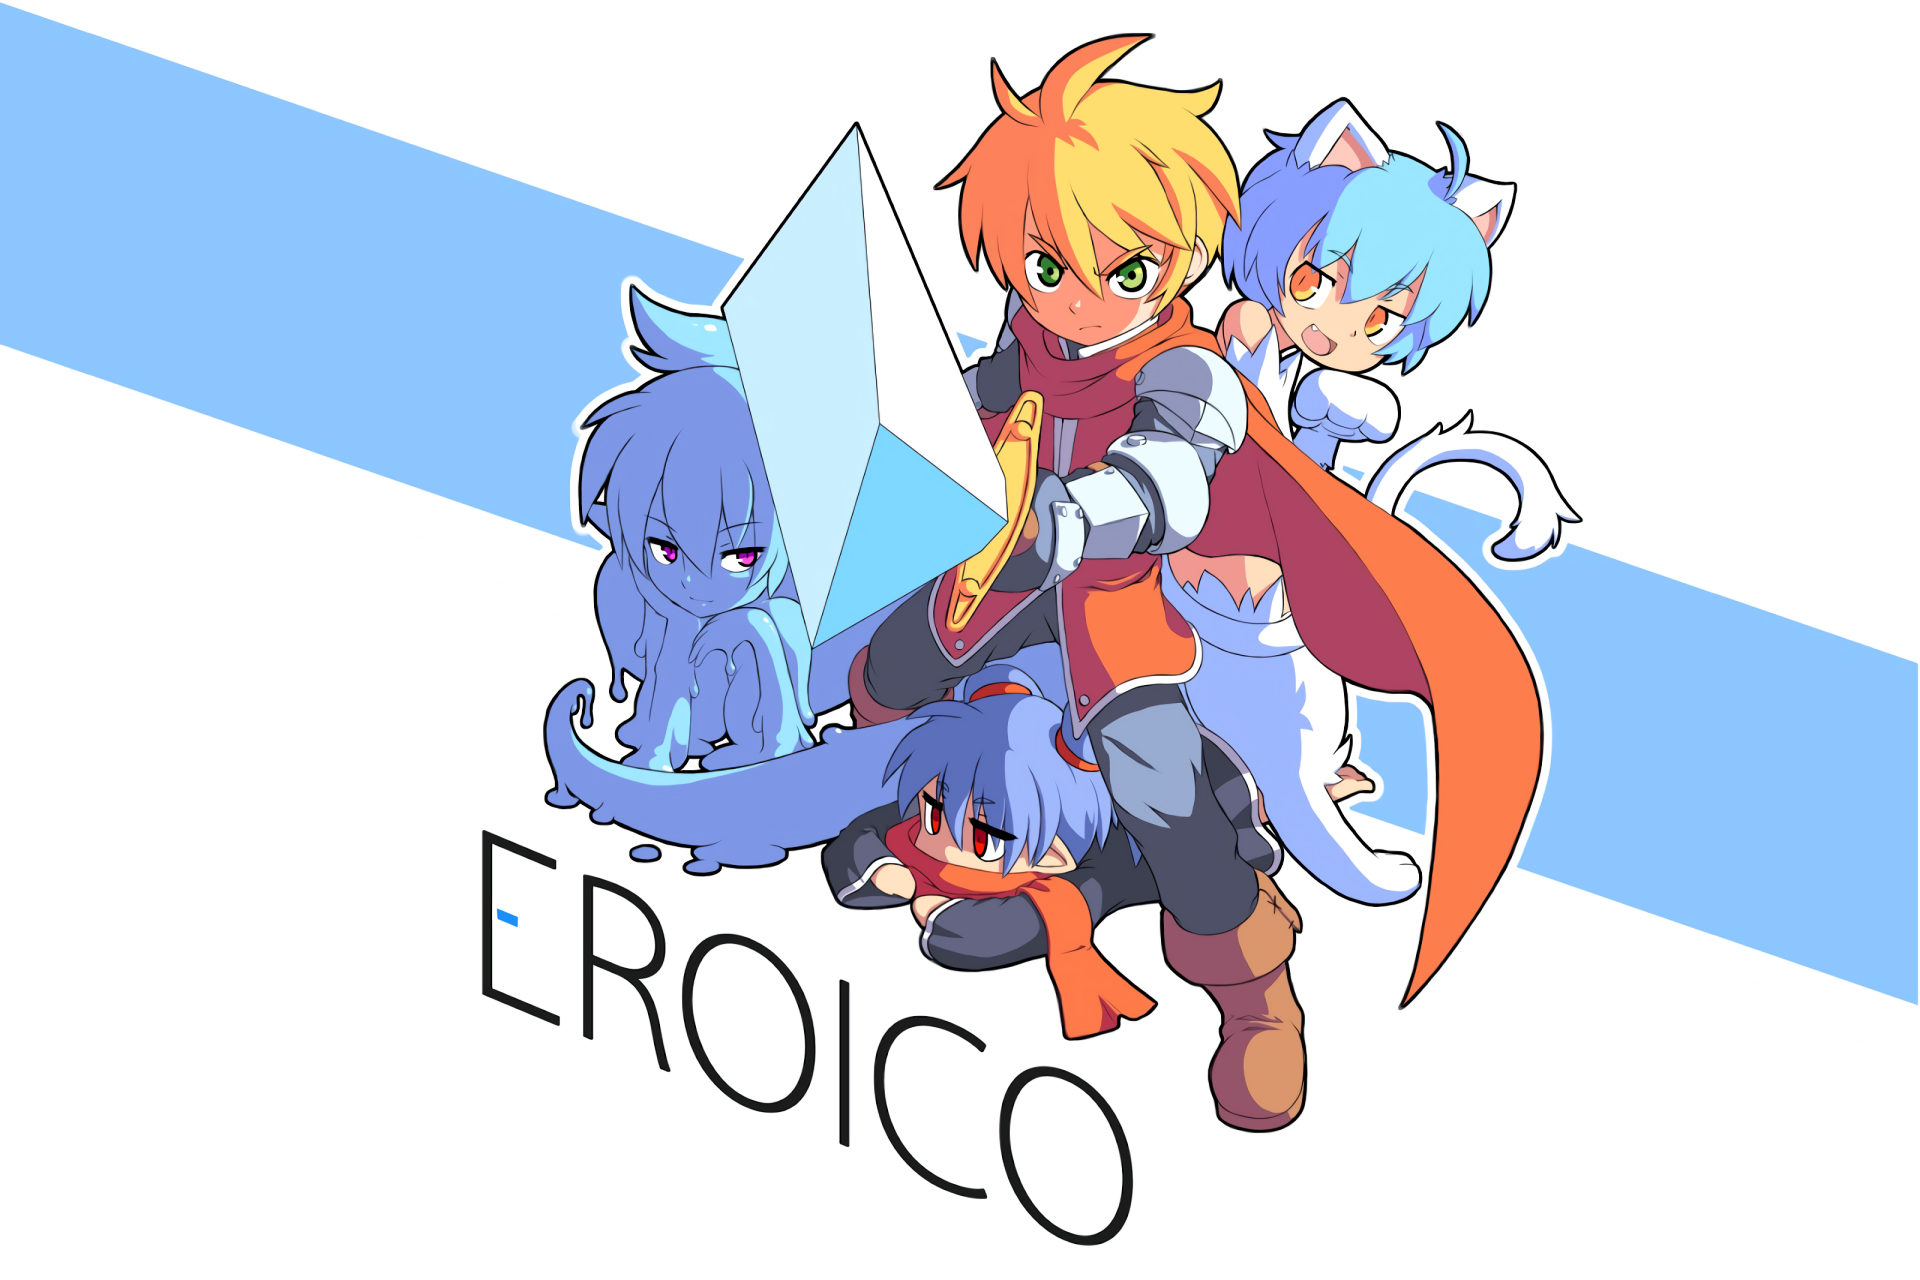 Eroico HD Wallpapers and Backgrounds.